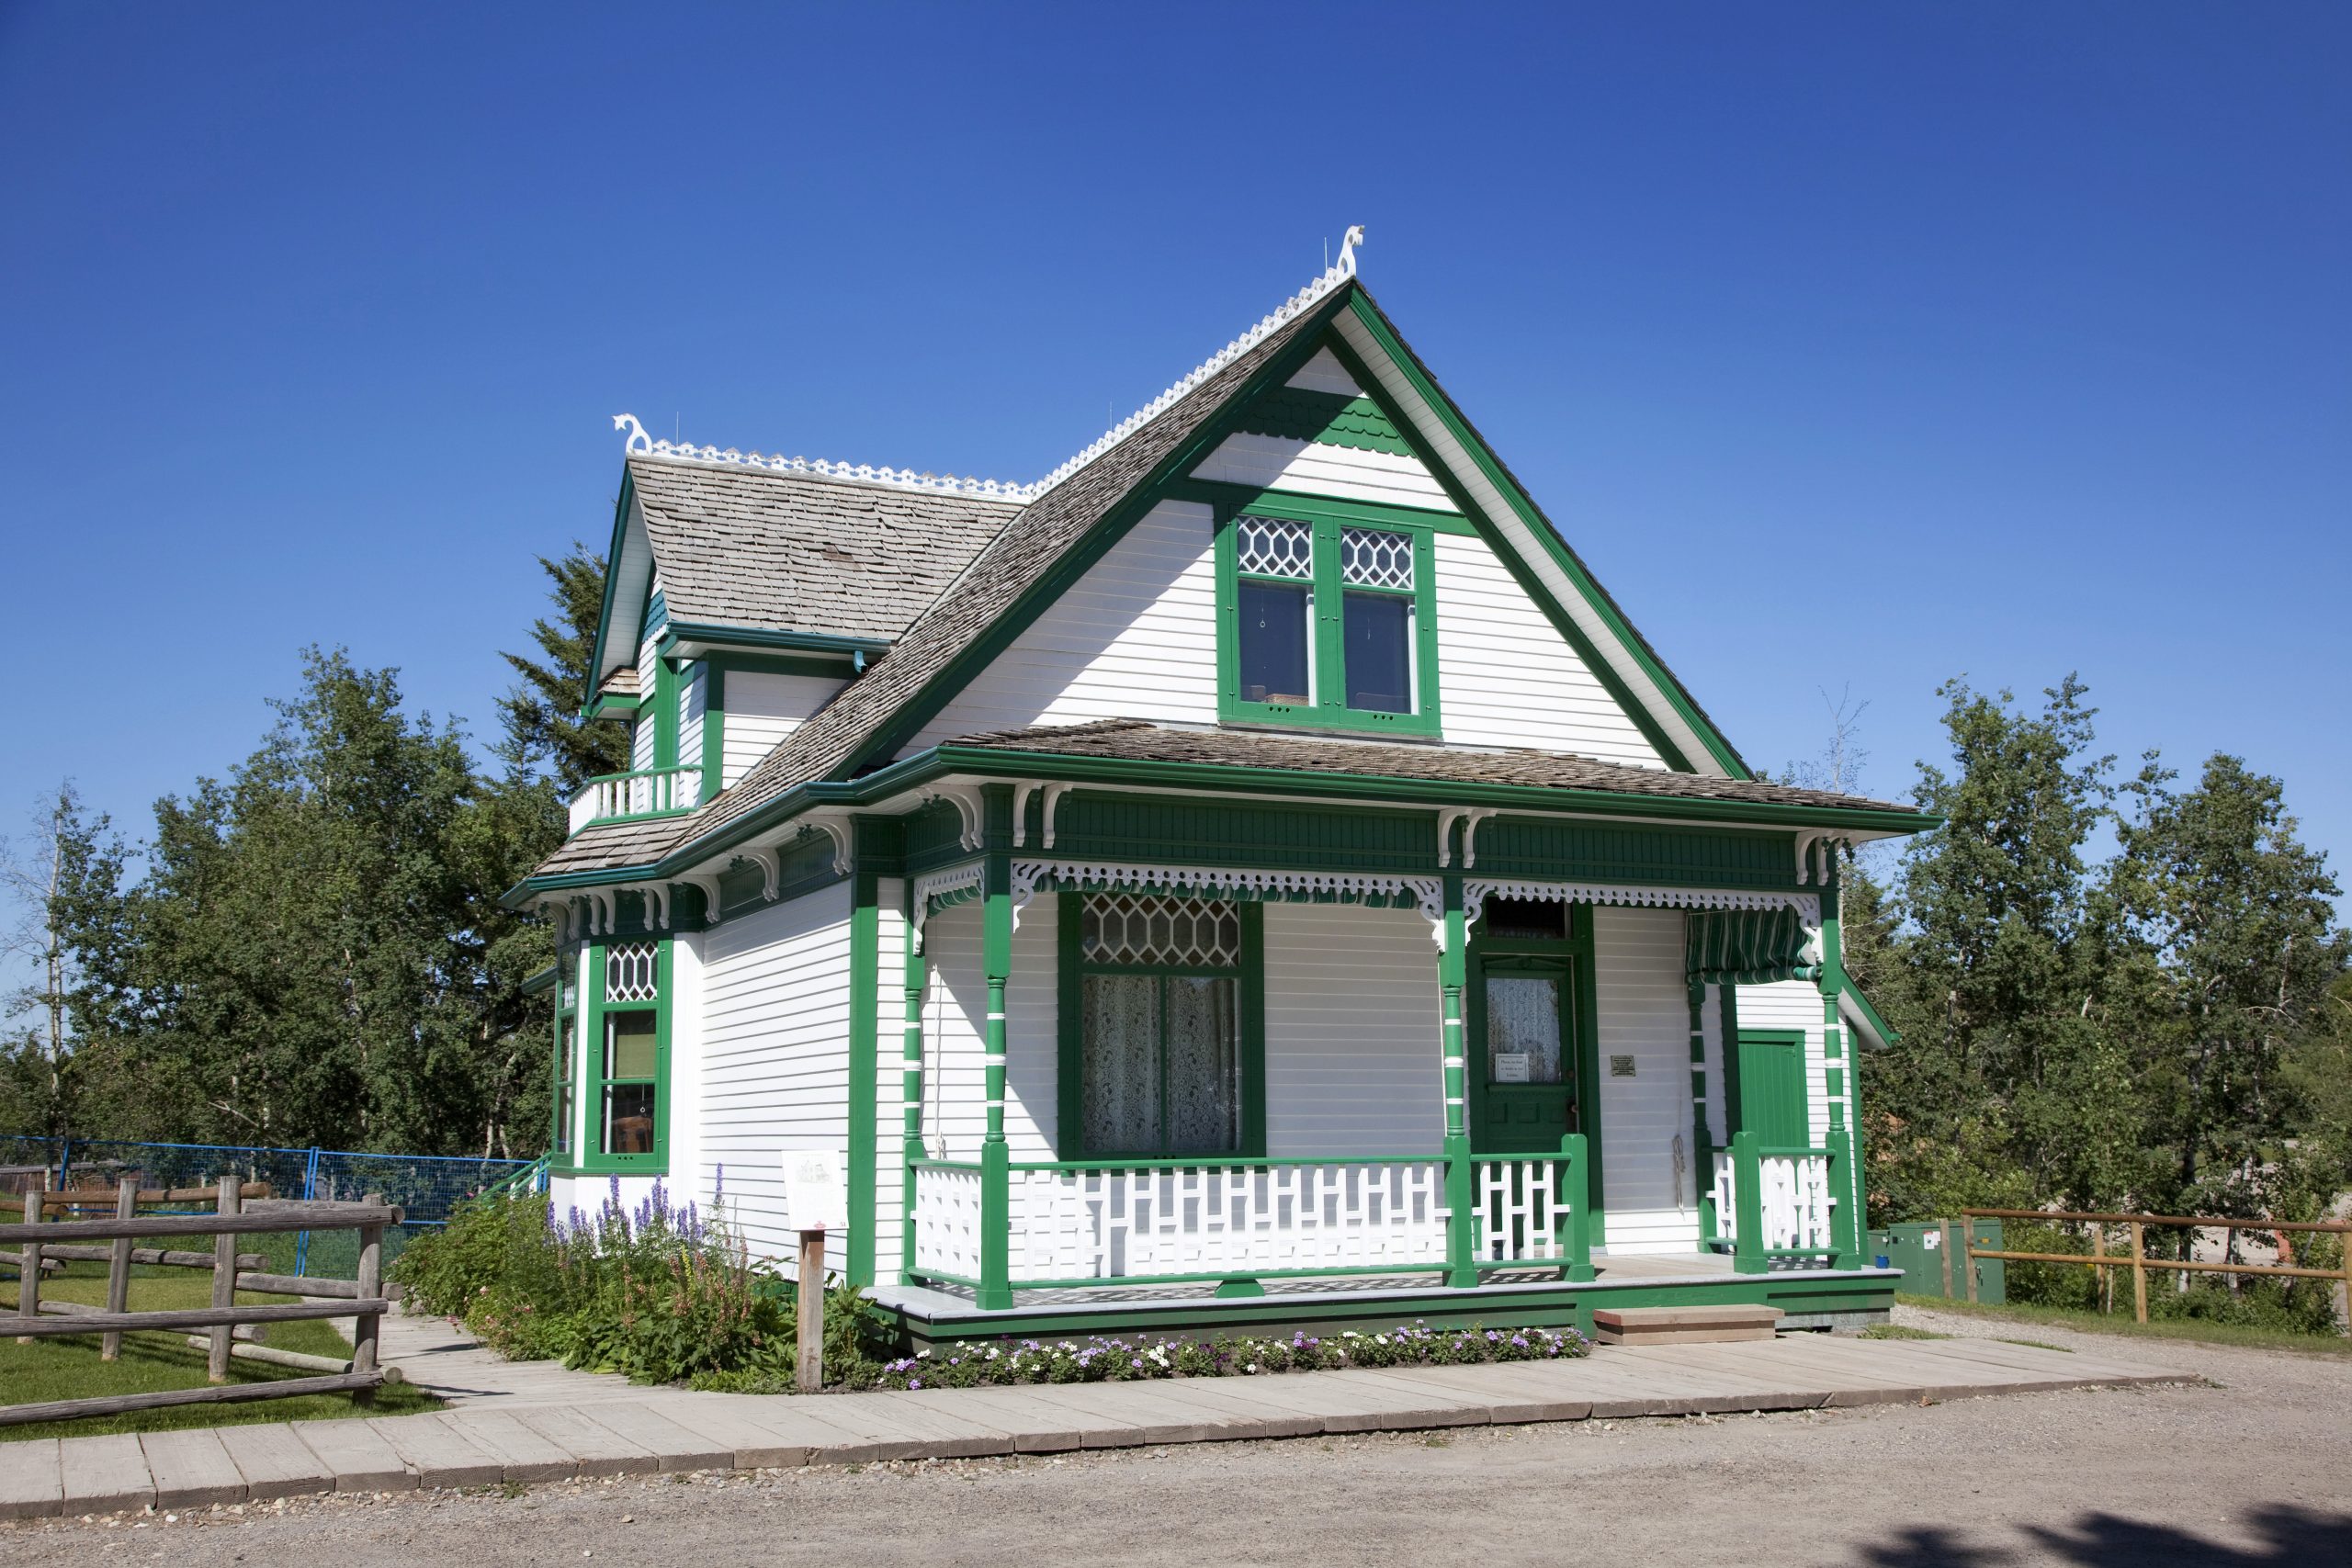 A donation through Legacy Giving restored the cottage hospital at Heritage Park to it's original white cottage with green trim